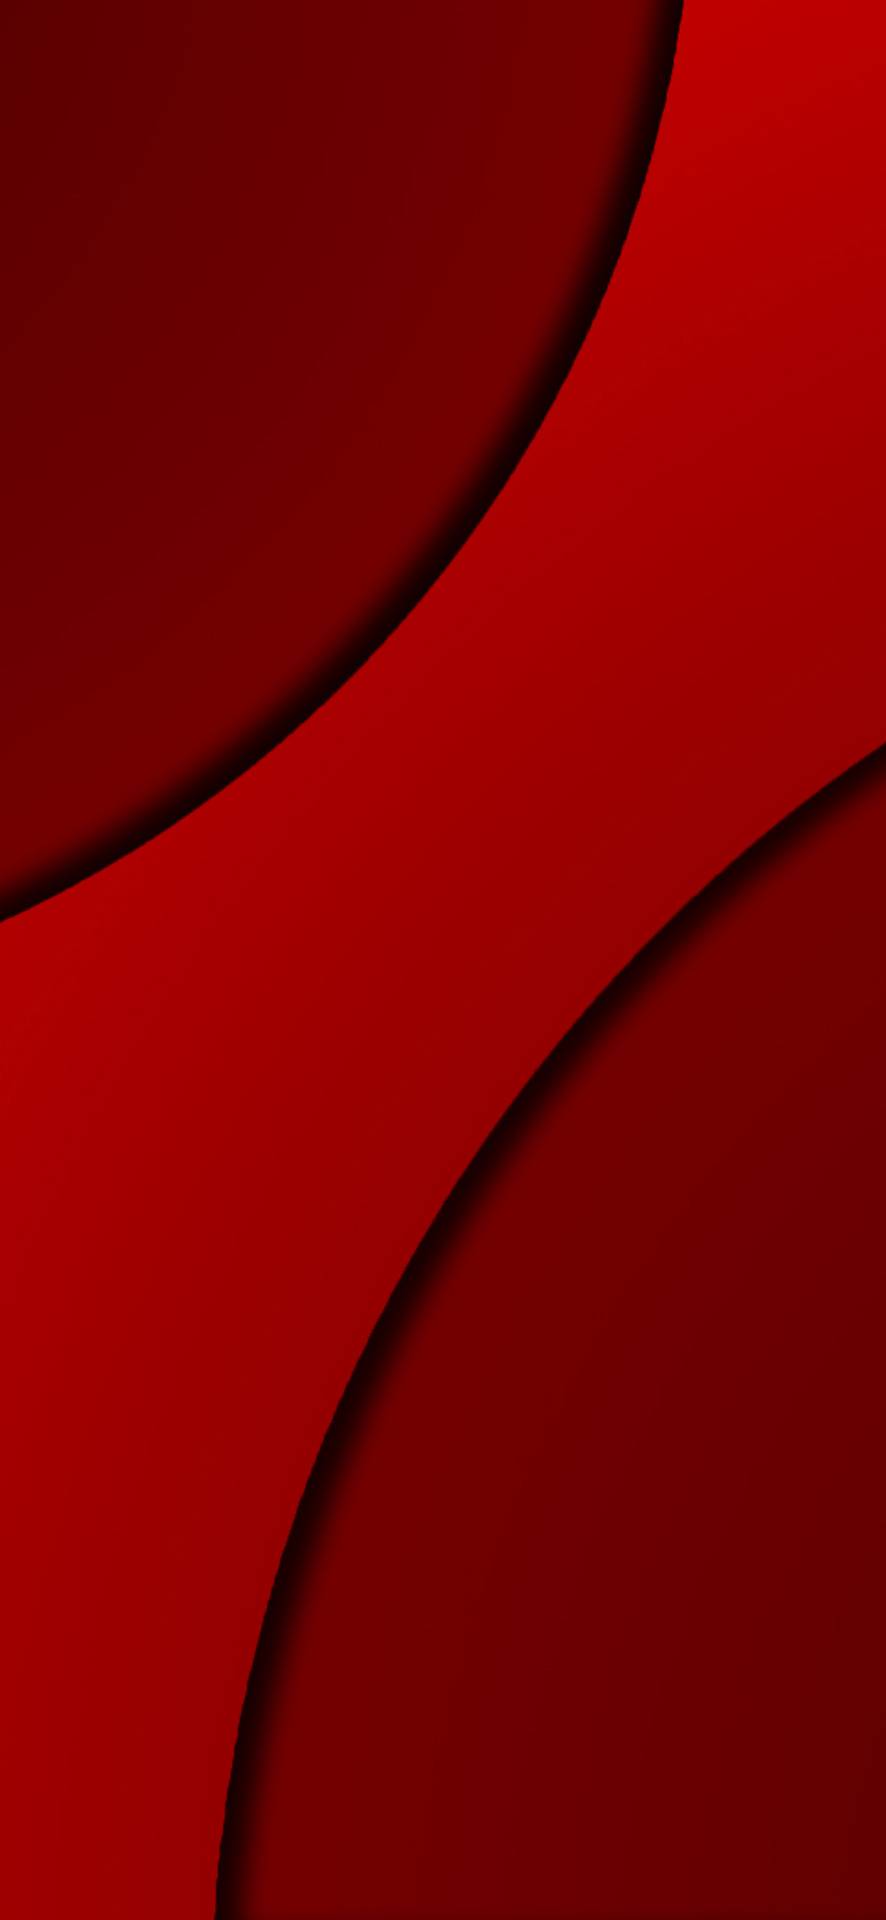 Red Background Wallpaper HD - 14